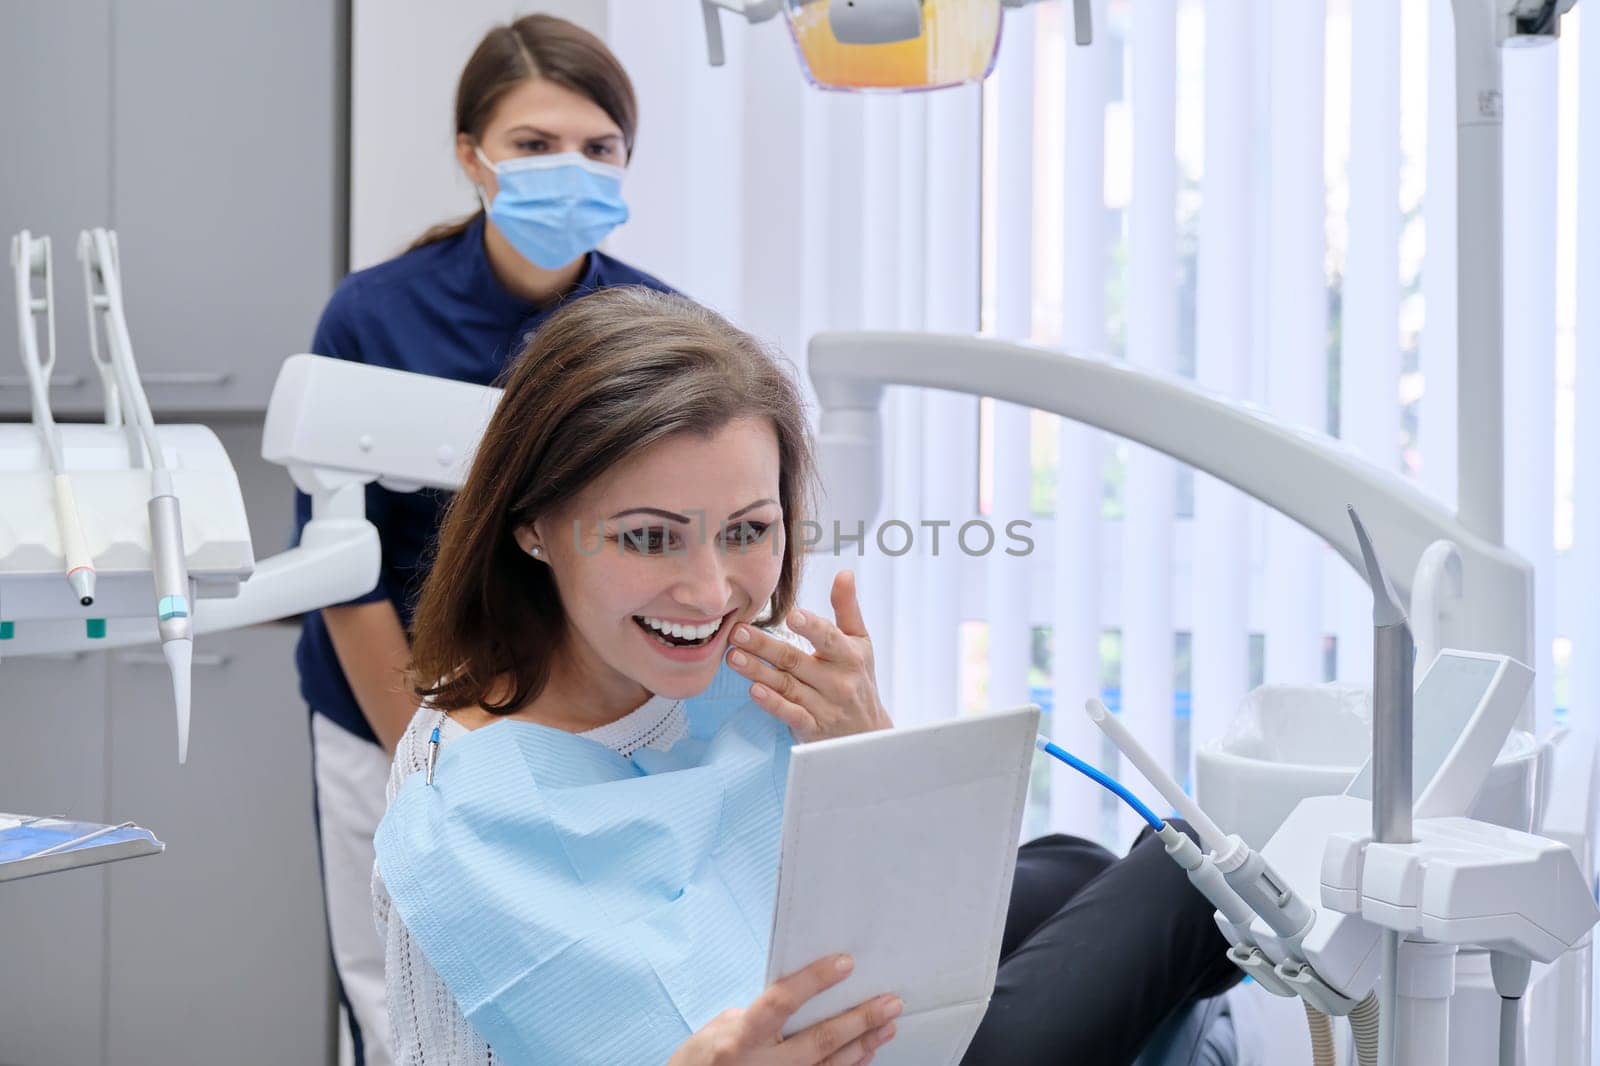 Happy middle aged woman with doctor dentist looking in mirror at teeth, sitting in dental chair. Medicine, dentistry and health care concept